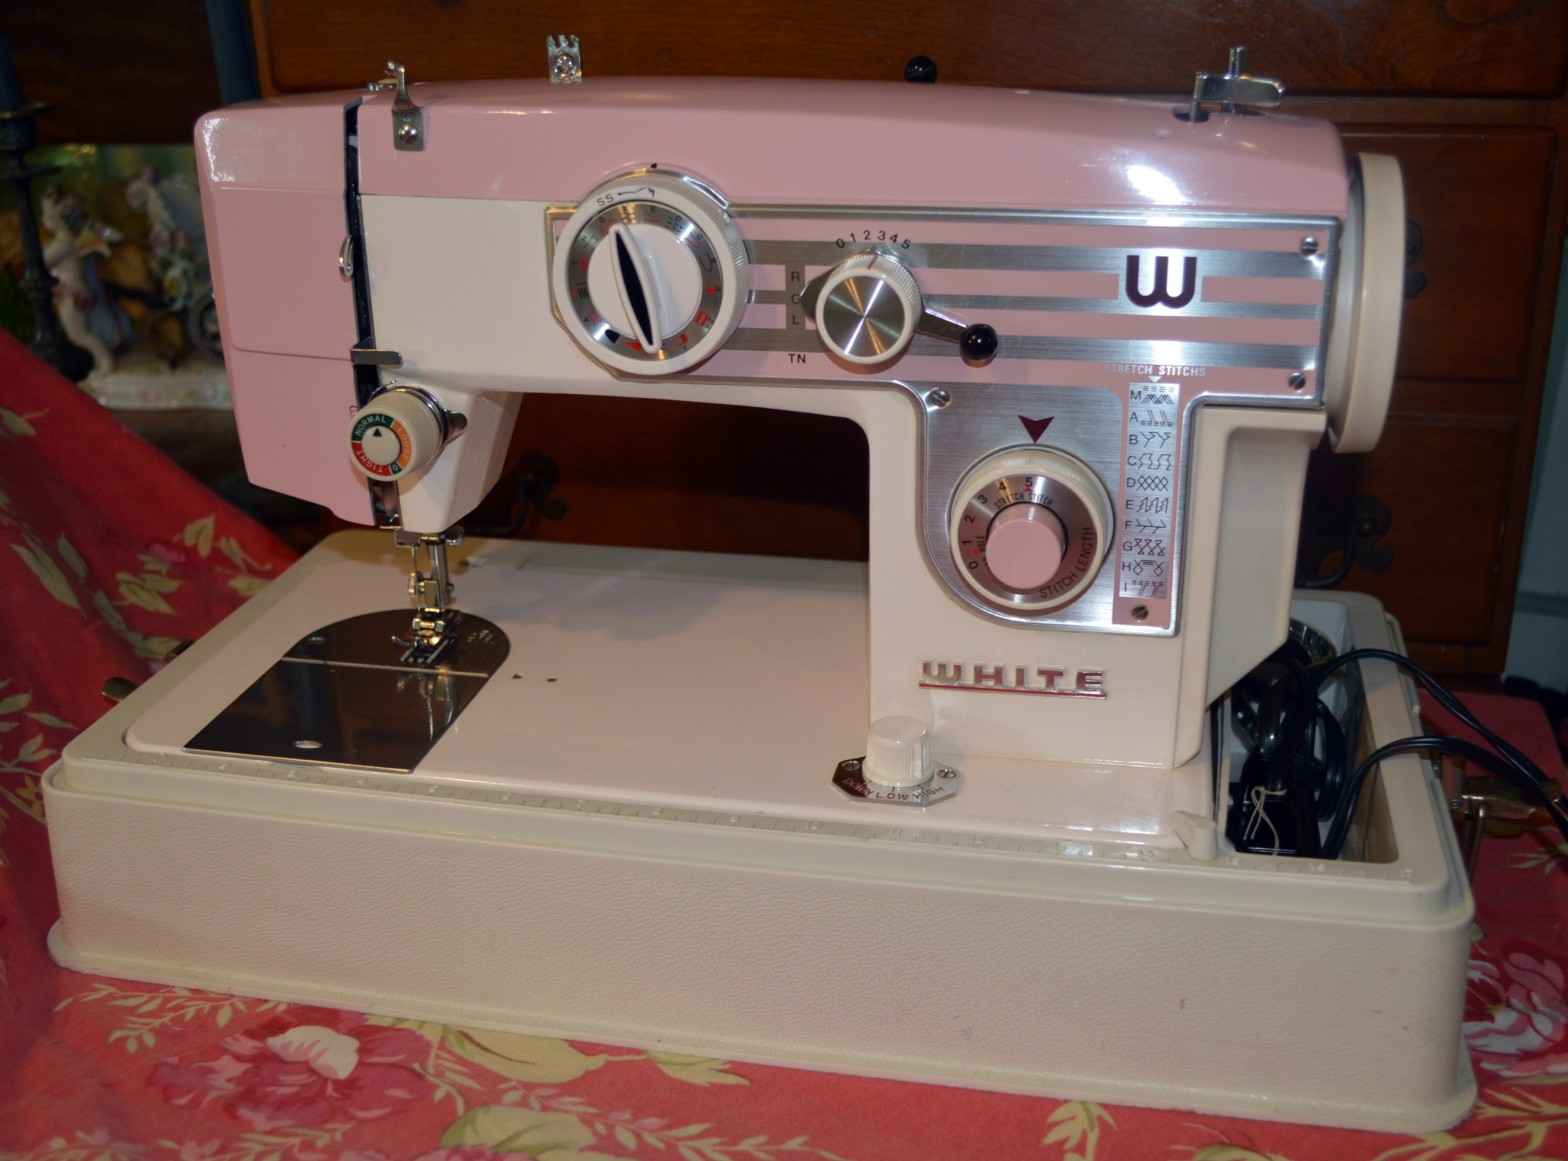 Need help identifying this sewing machine. I got it secondhand and it  didn't come with any other things (such as a power cord, manual, etc). It  seems to be somewhat old, at